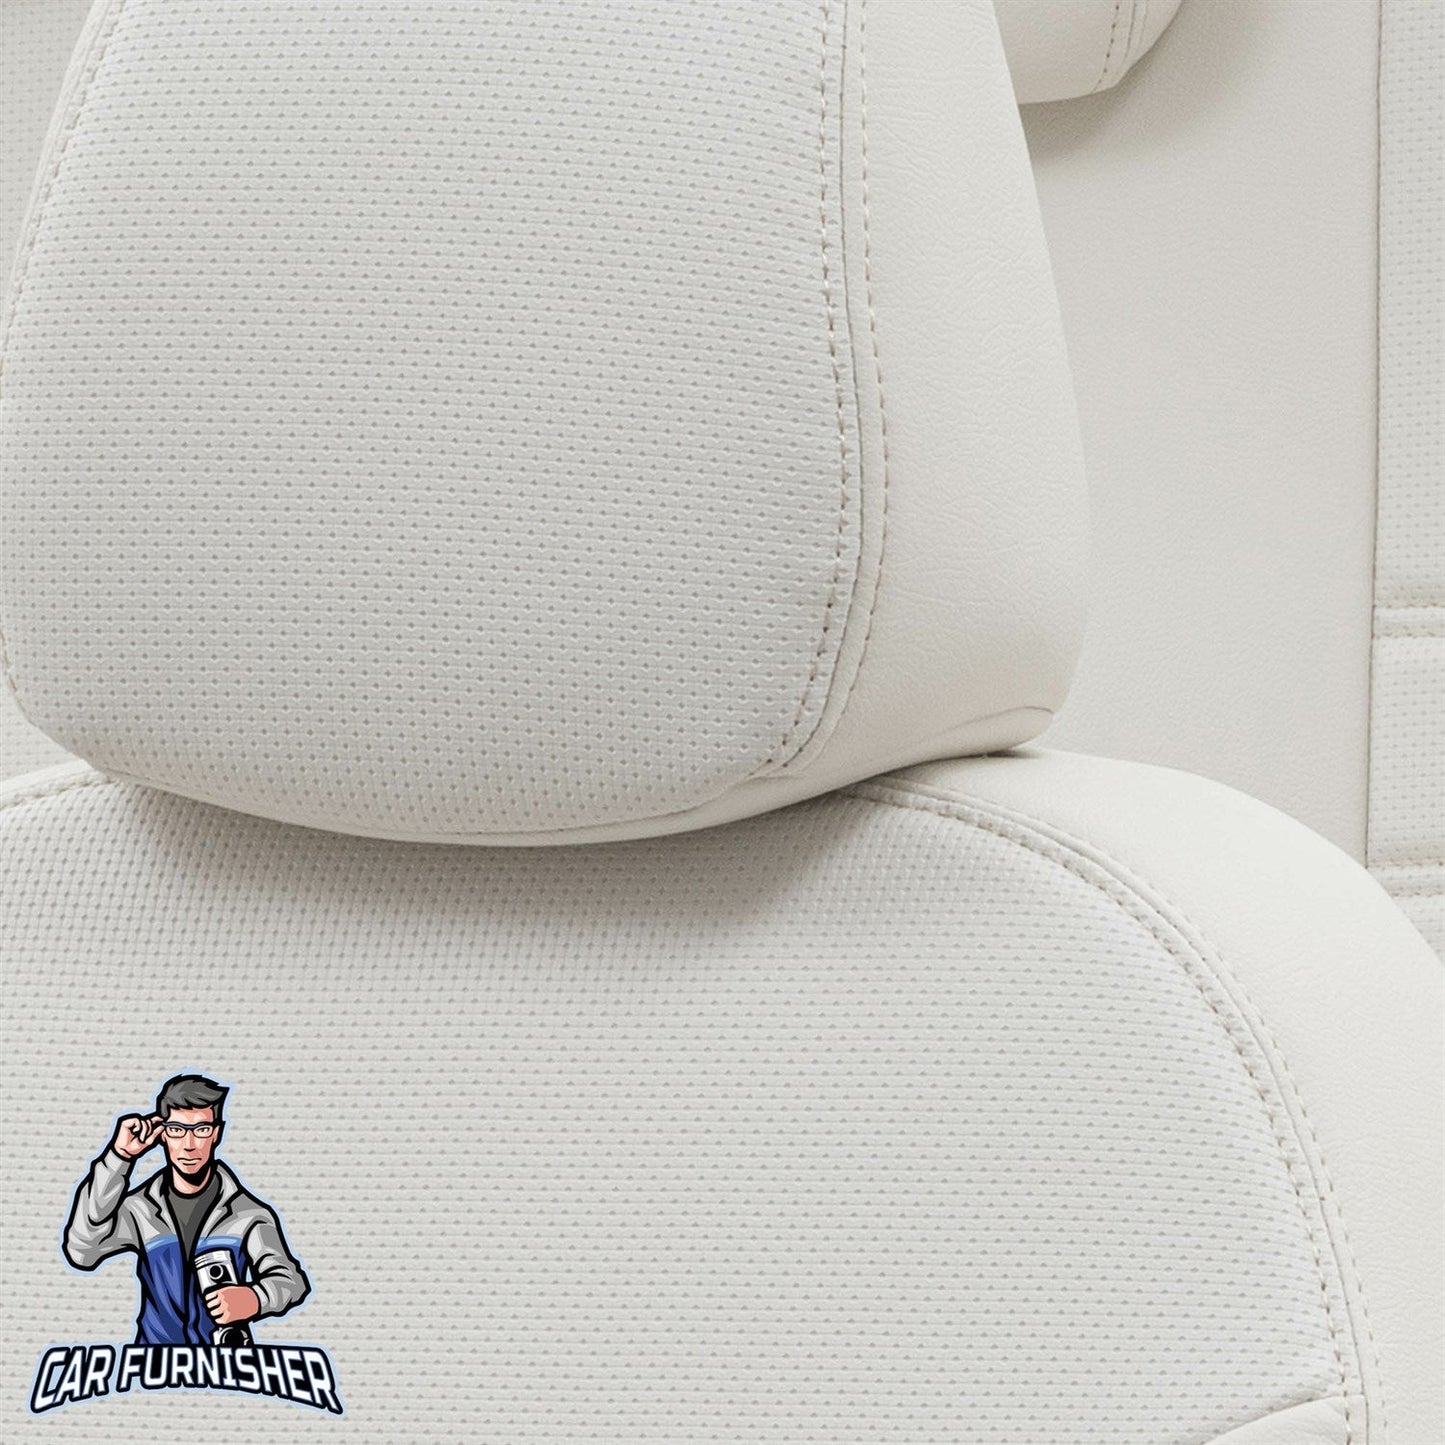 Kia Sportage Seat Covers New York Leather Design Ivory Leather